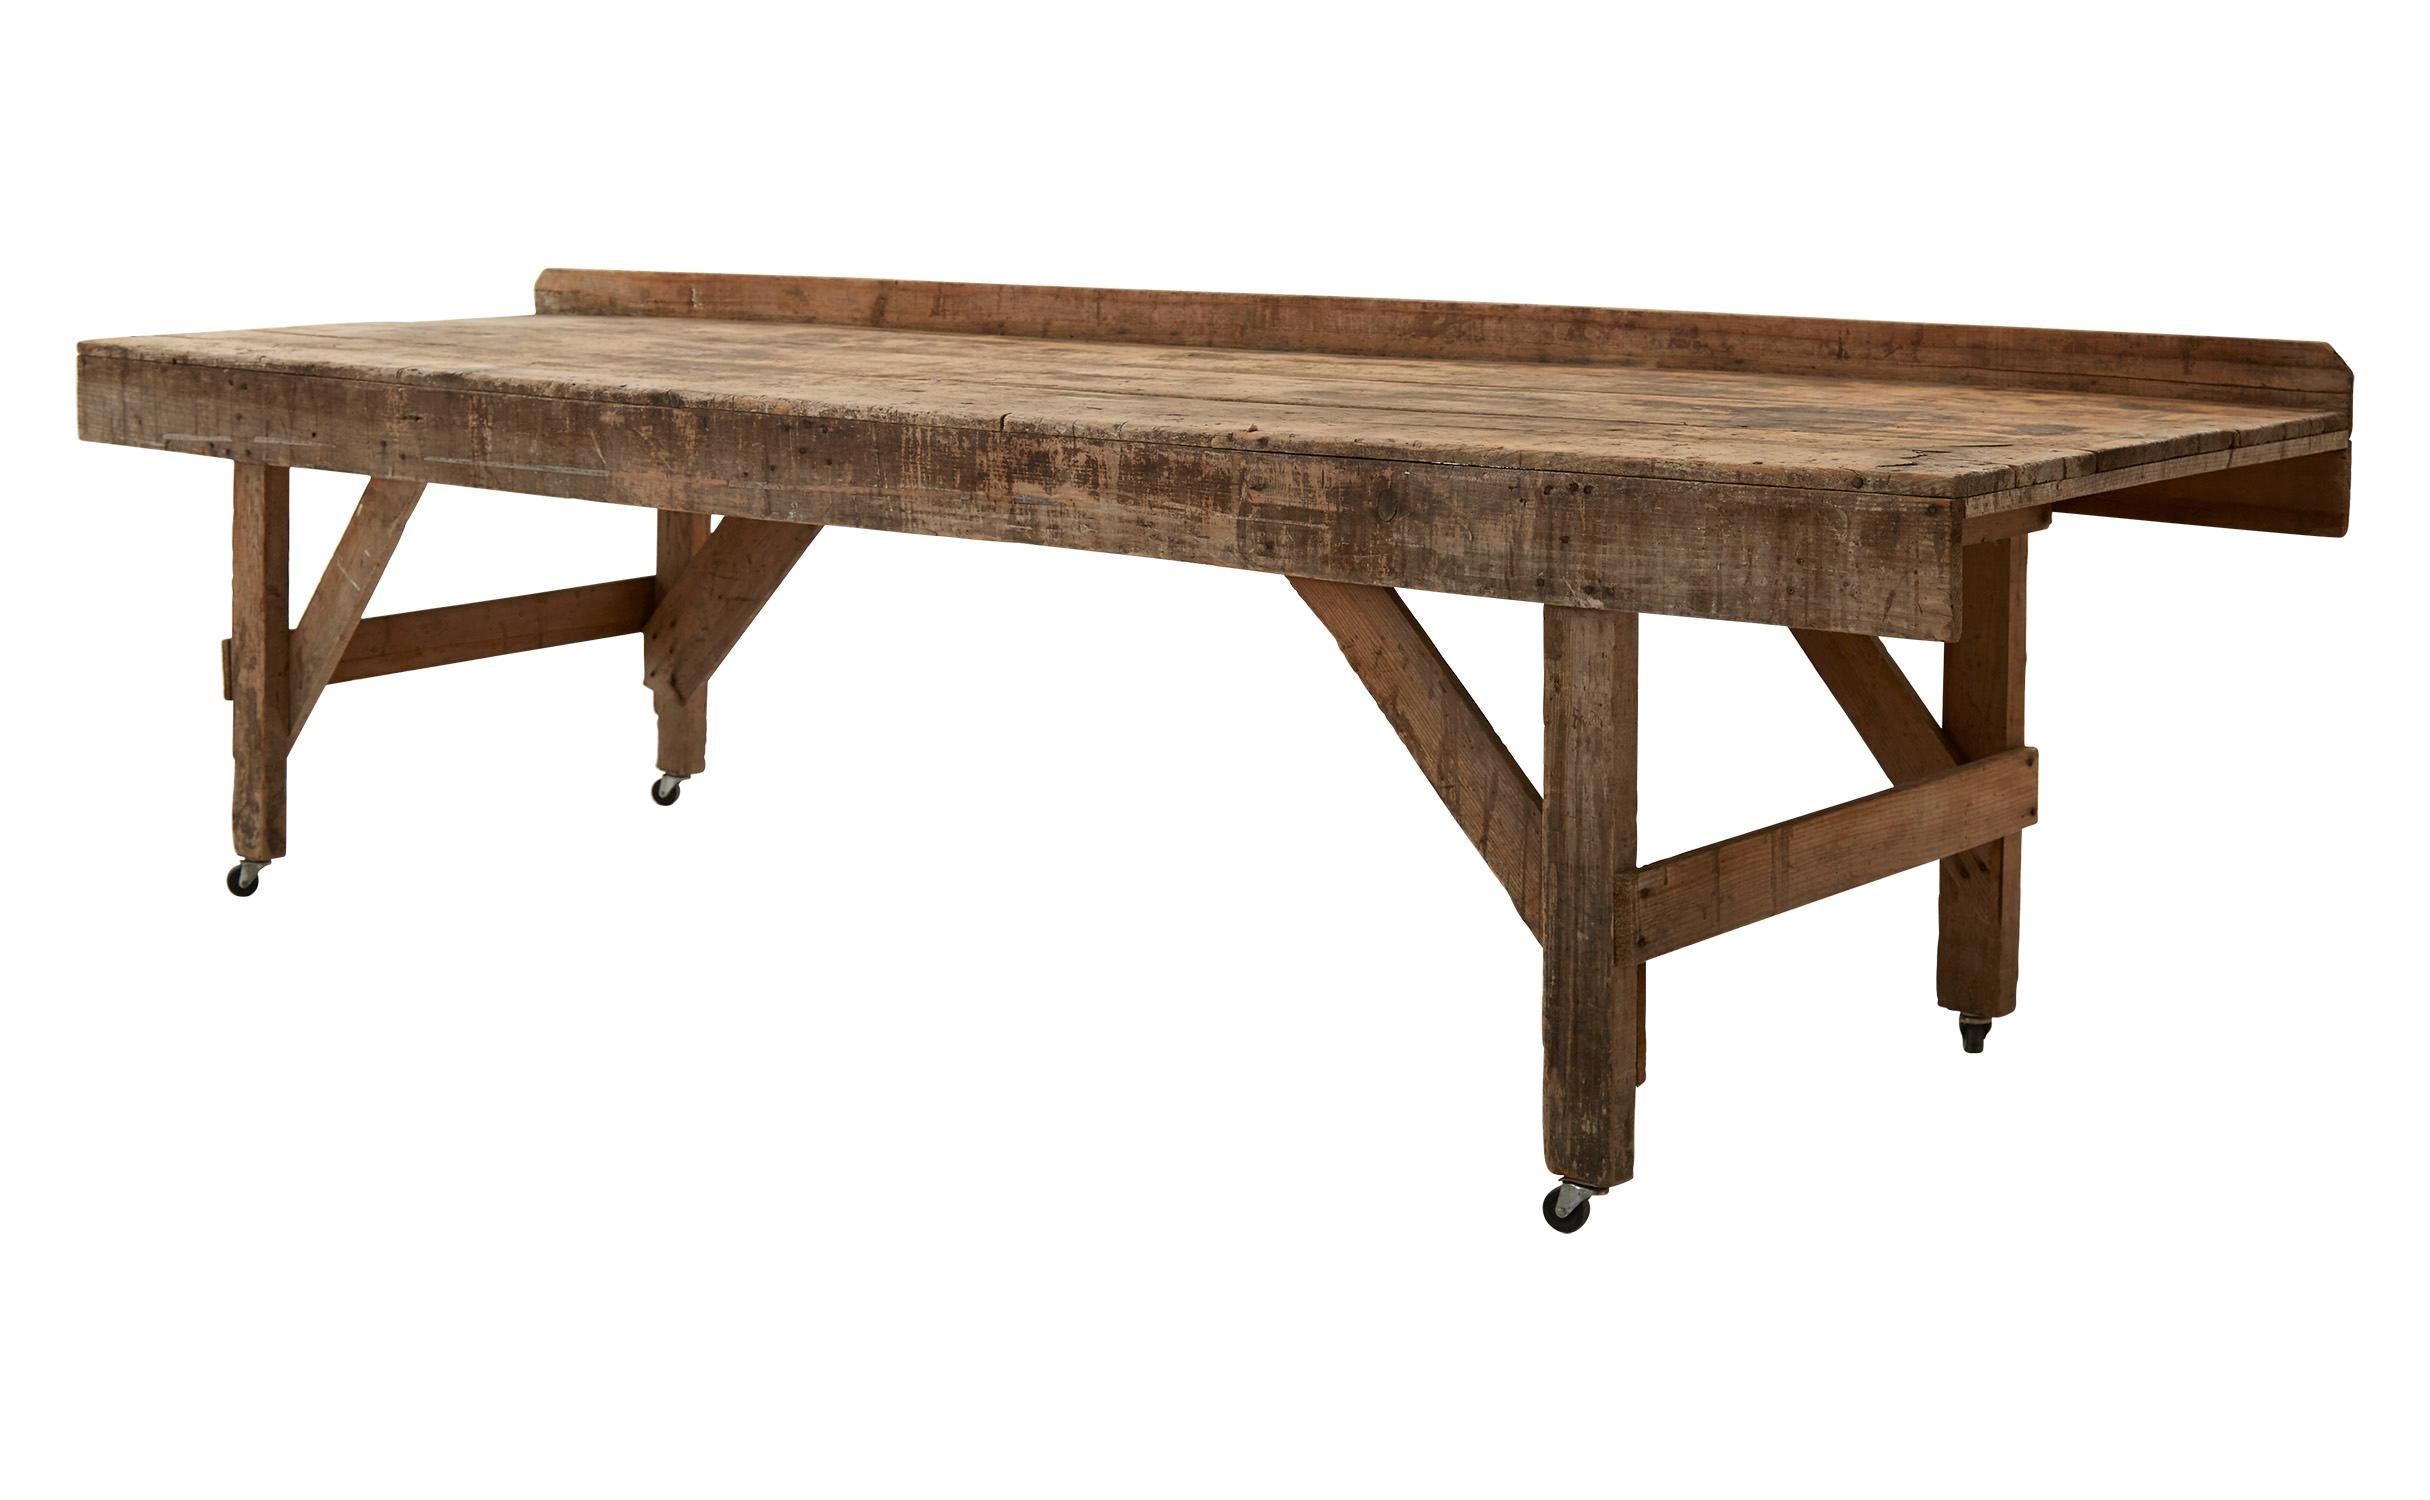 Made in America in the early 20th century, our industrial Vintage Work Table is crafted from patinaed wood, with caster wheels on all four legs. Although well-worn in appearance with many scratches and markings consistent with its age and use, this